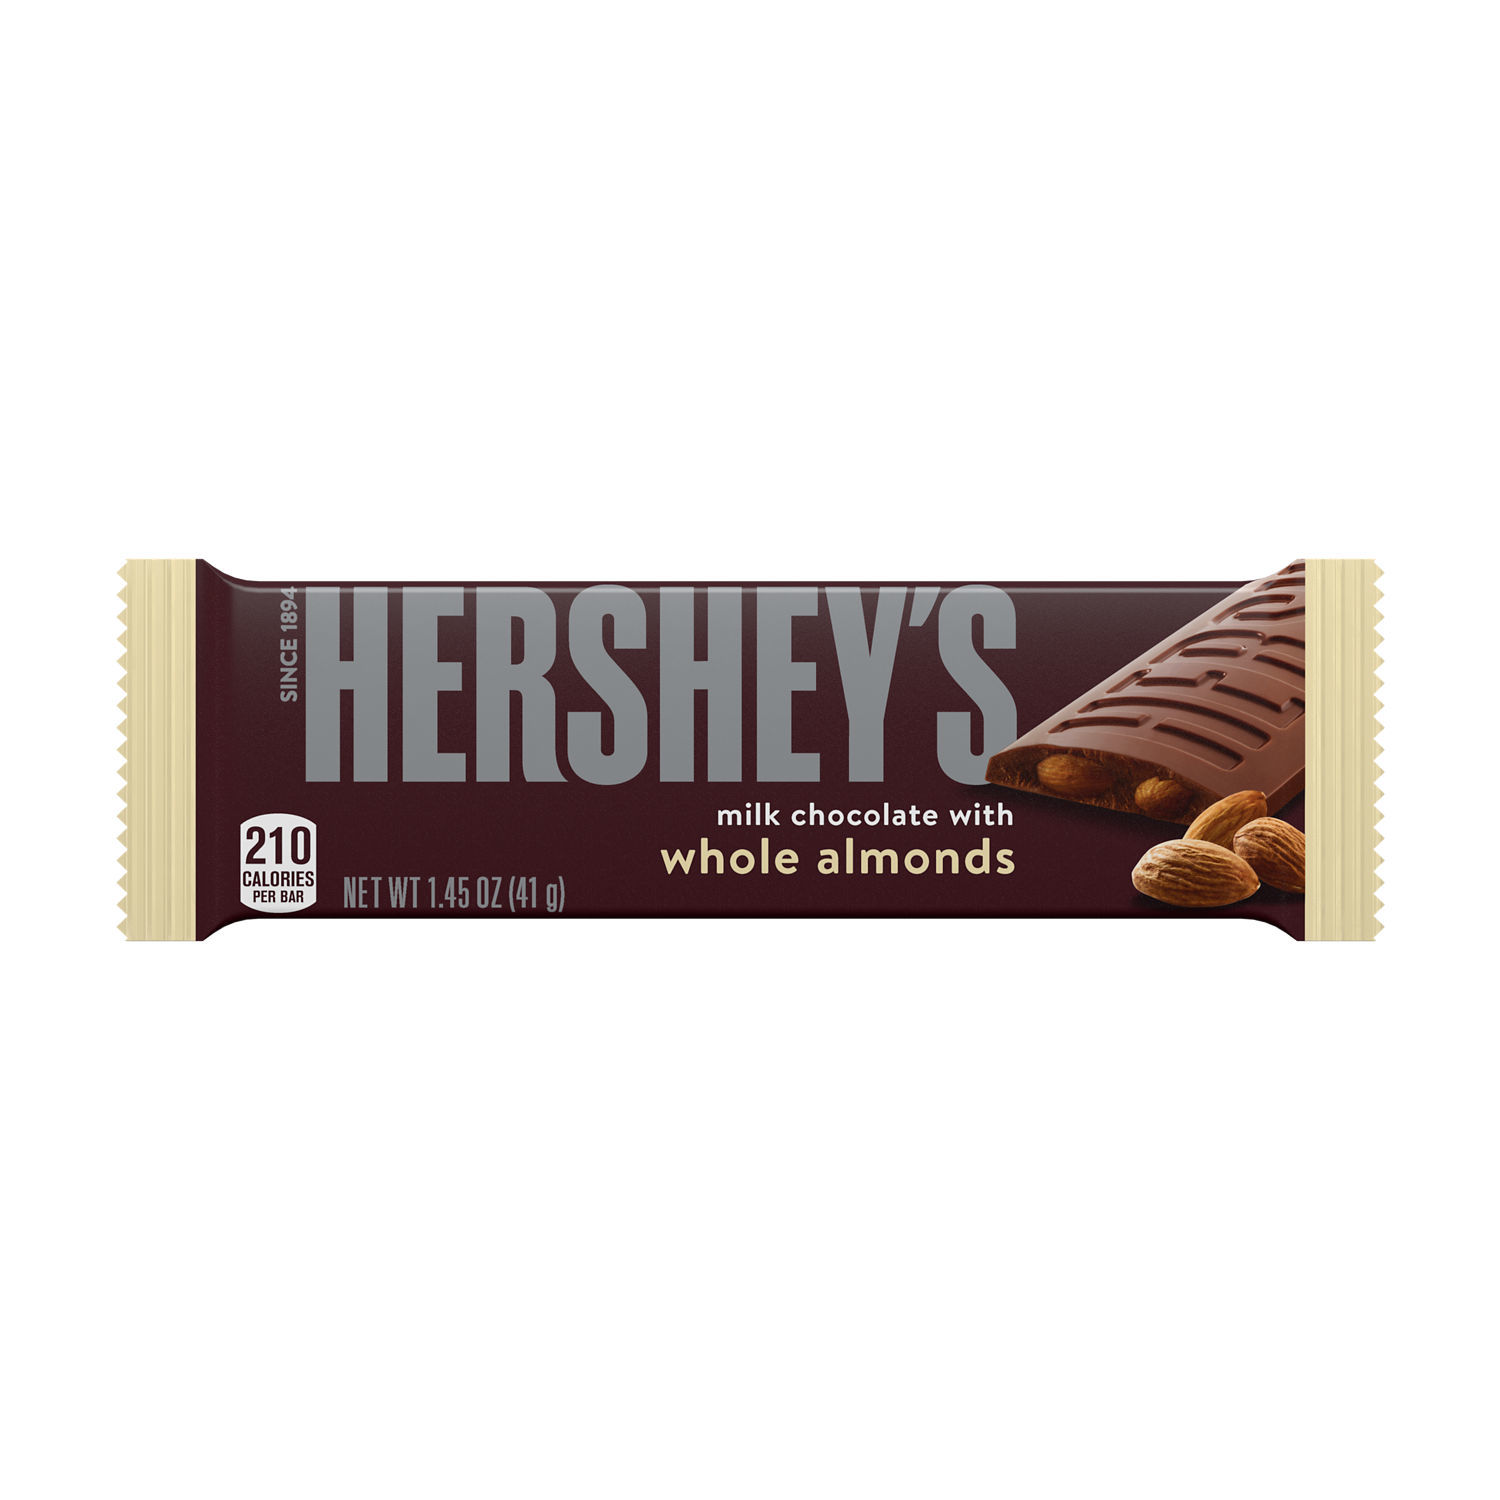 Hershey's Milk Chocolate with Whole Almonds Candy, Bars 1.45 oz, 6 Count - image 4 of 9